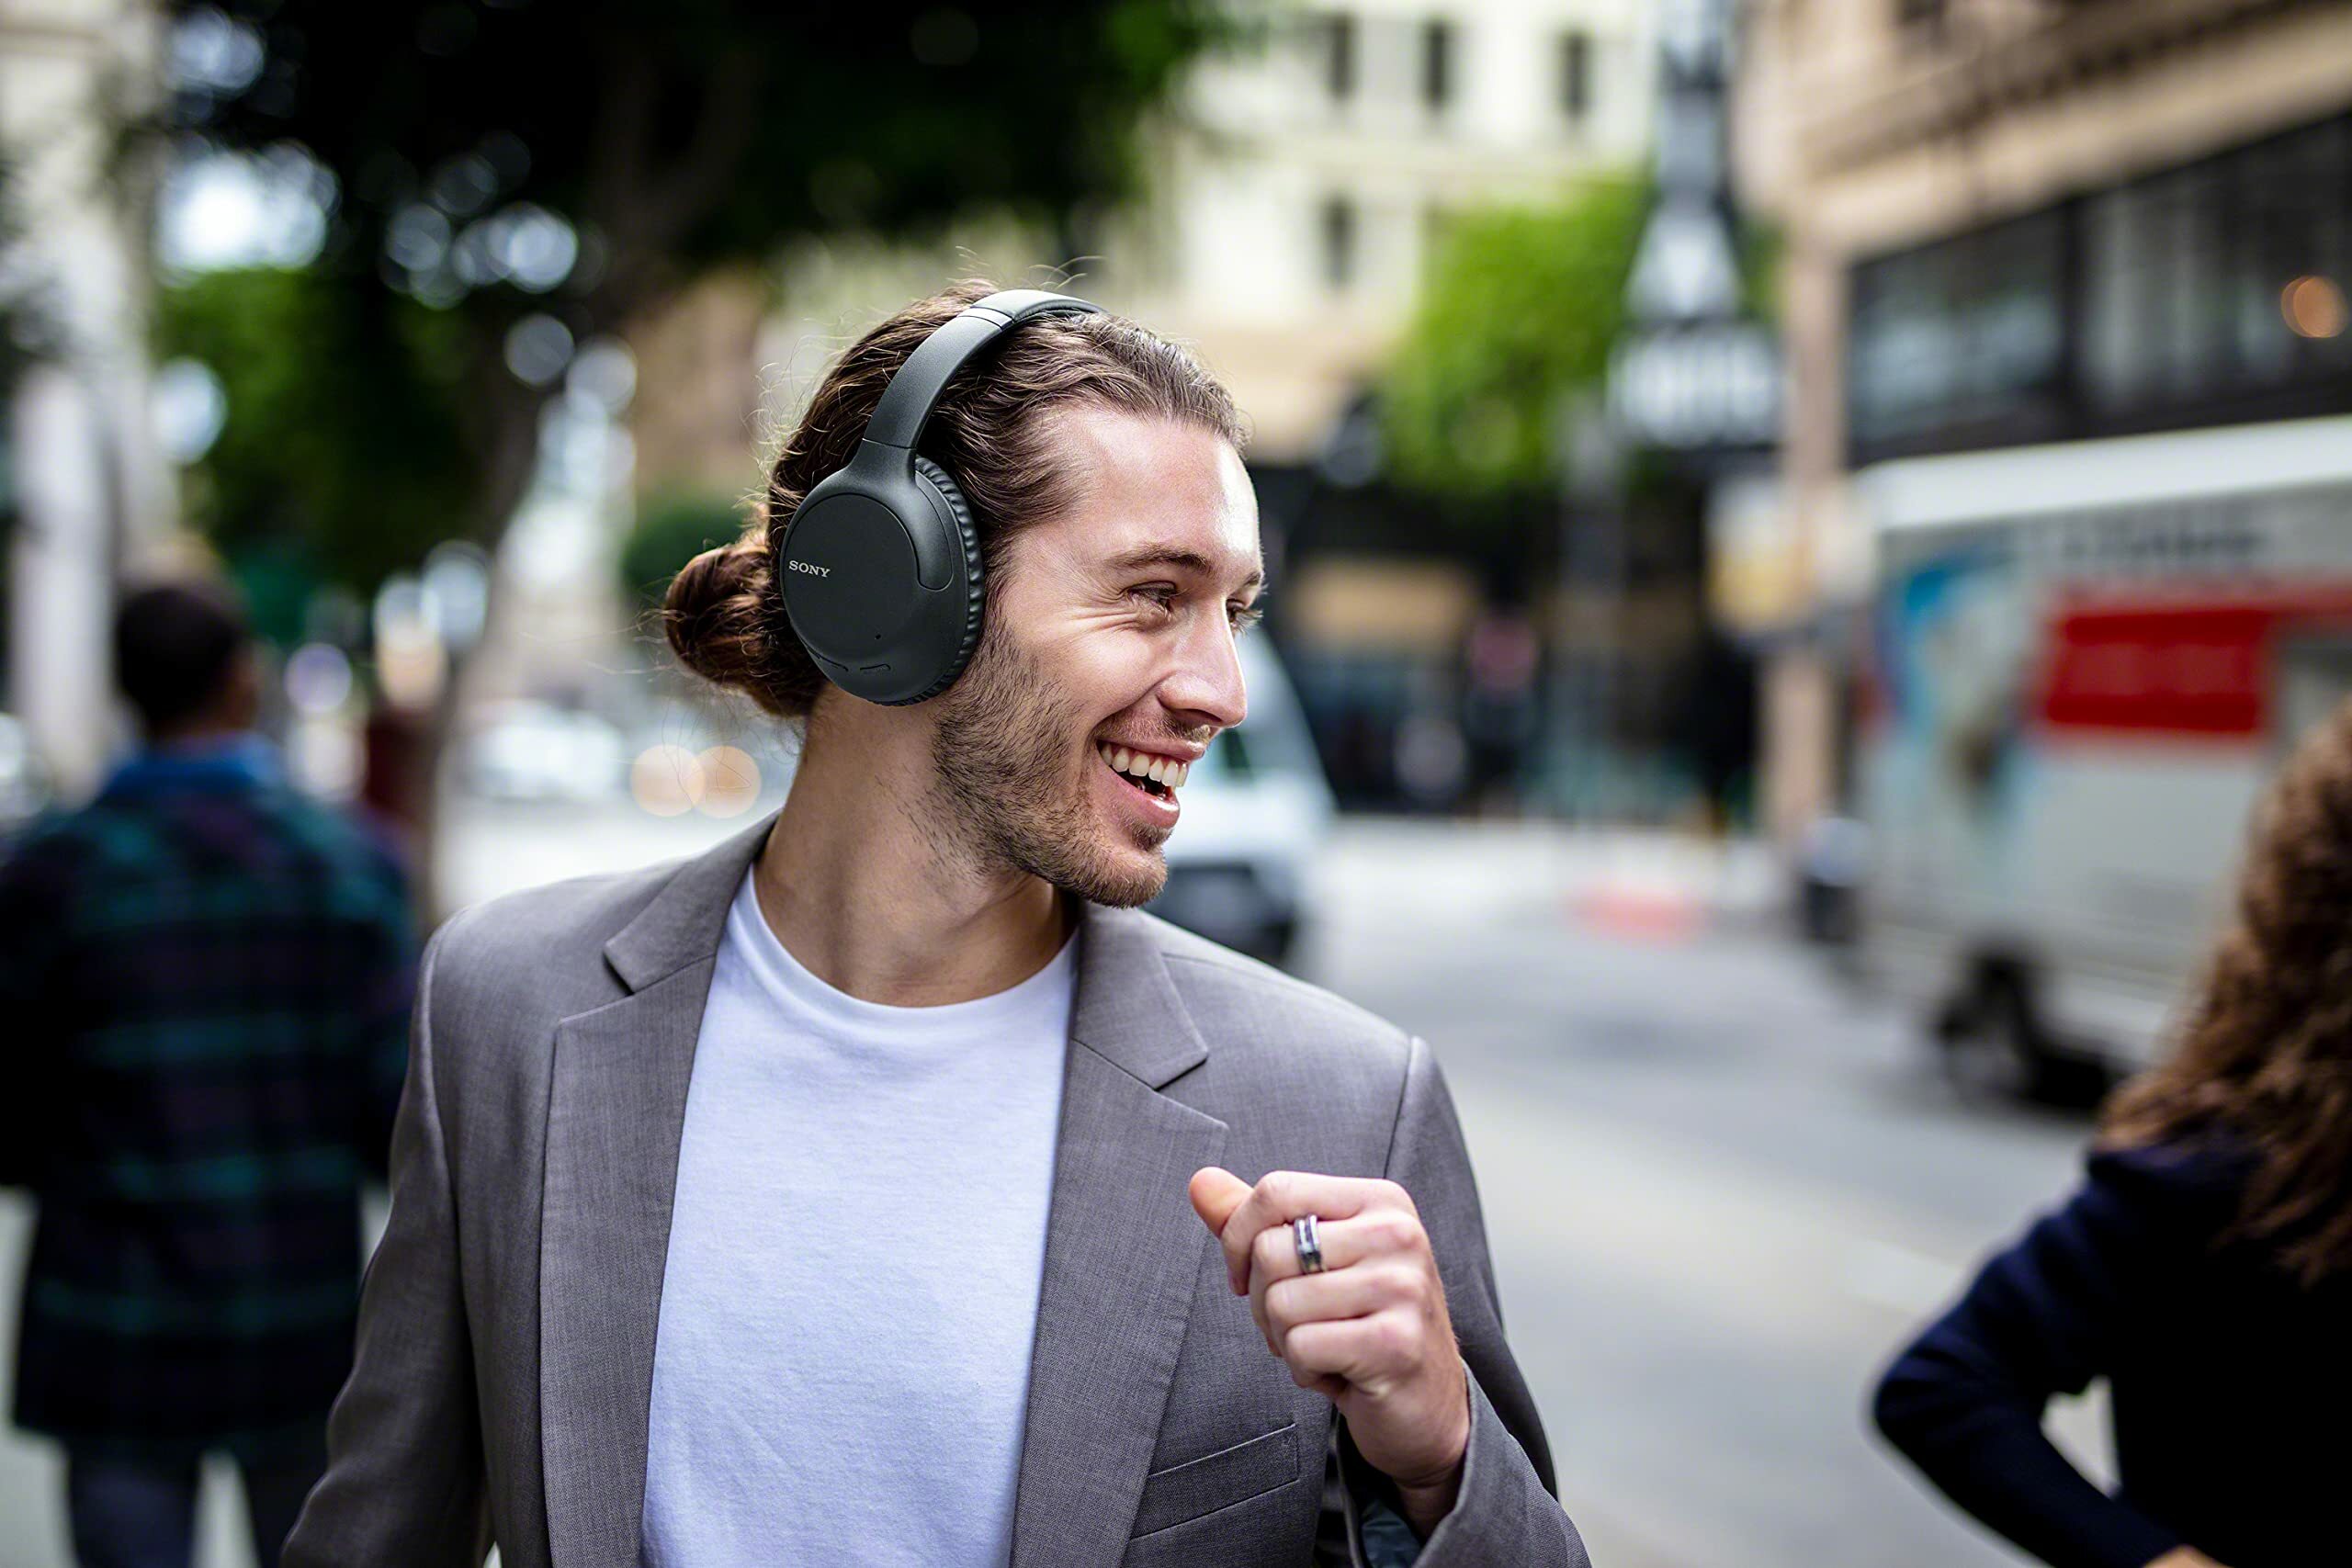 Man smiling in urban environment with Sony headphones